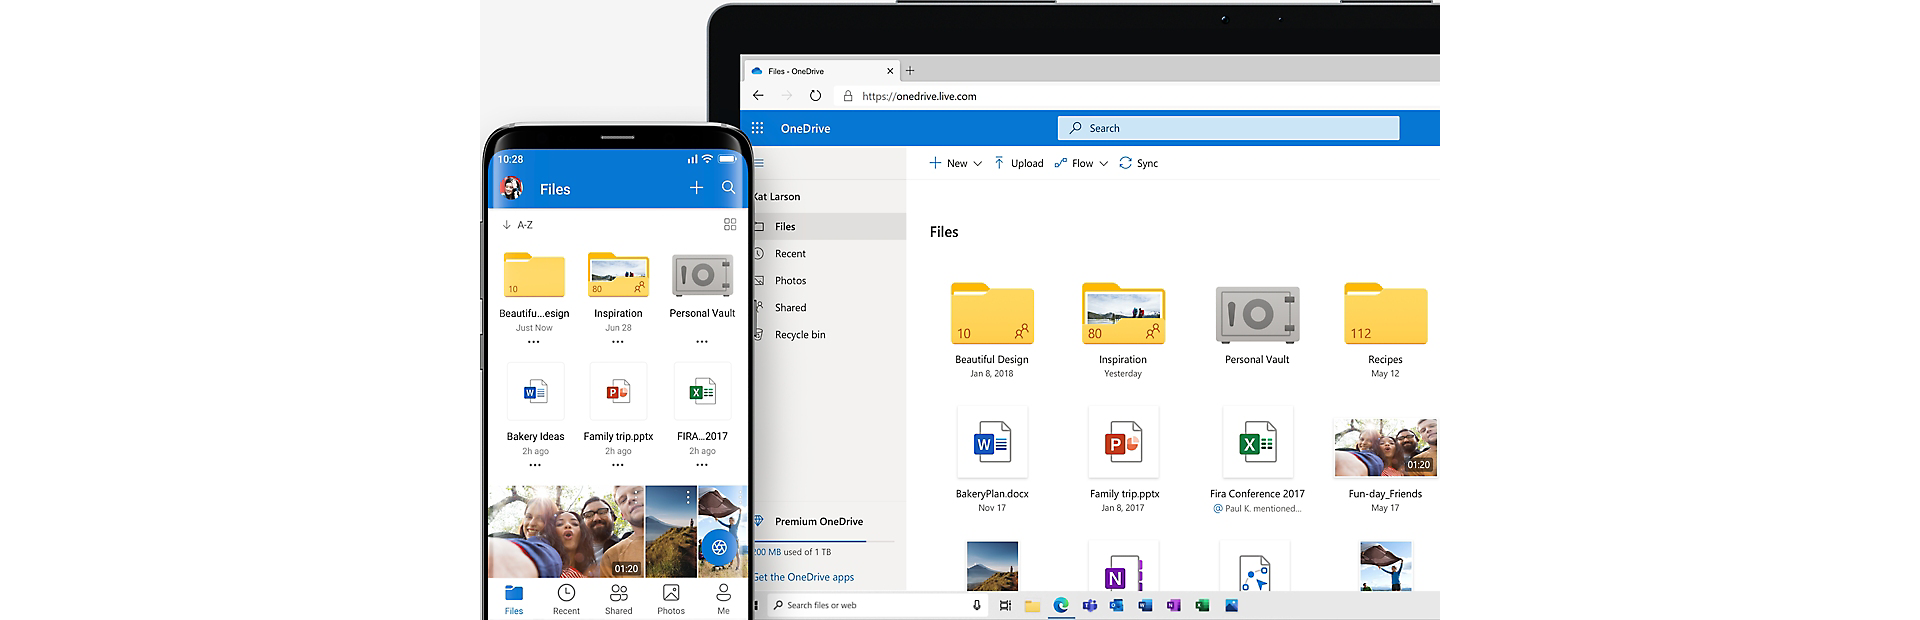 Download the OneDrive App for PC, Mac, Android, or iOS – Microsoft